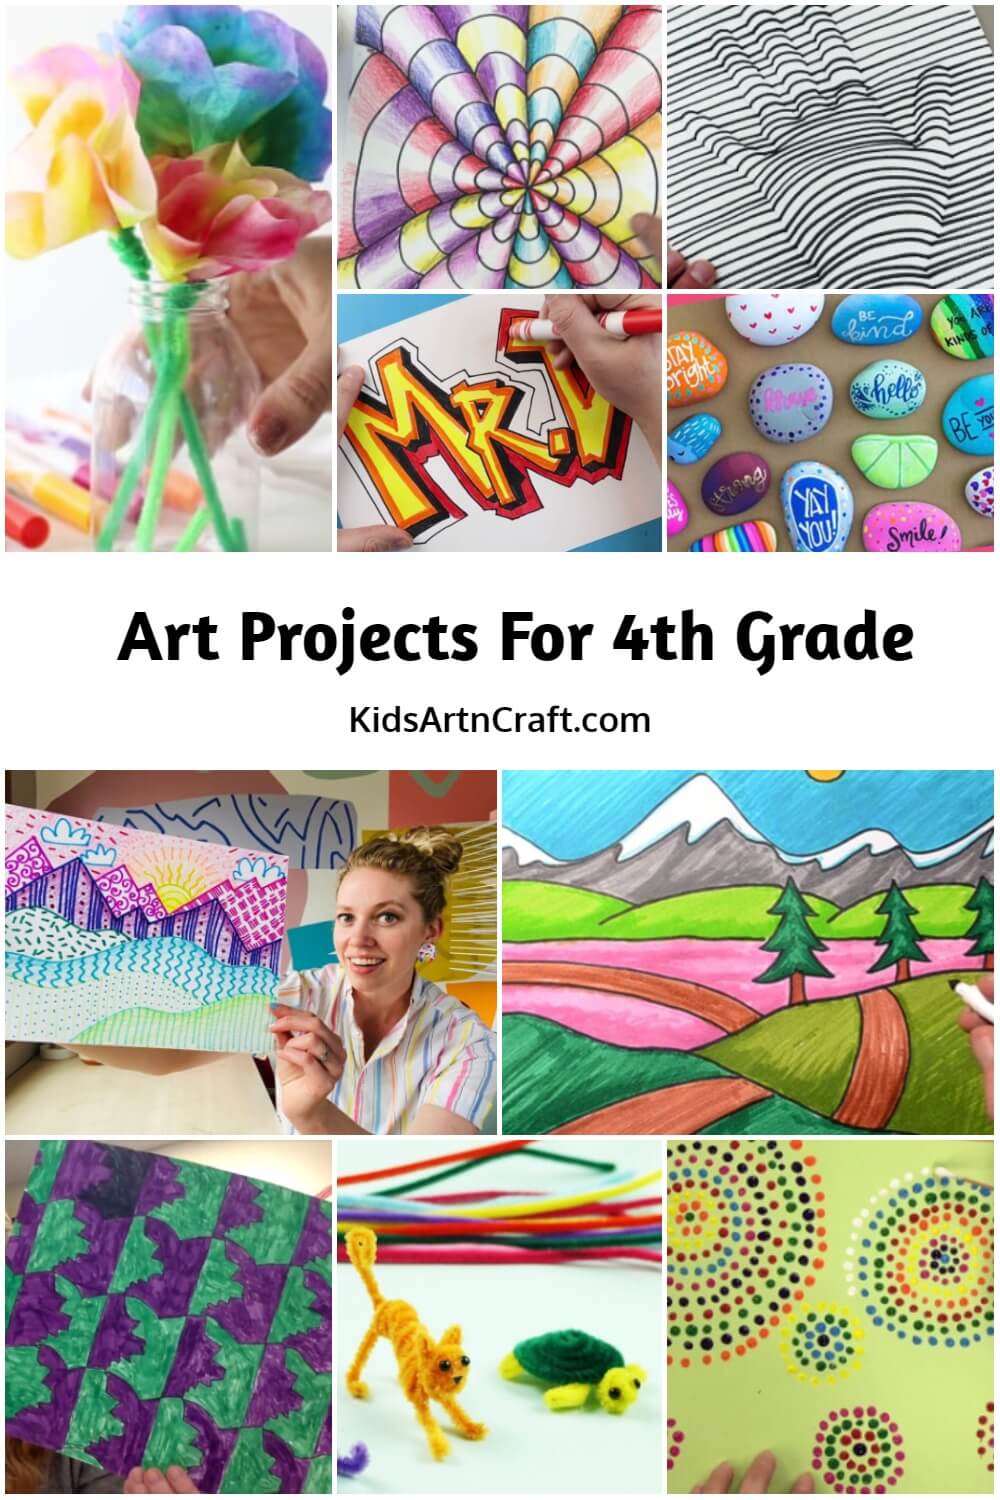 Art Projects for 4th Grade